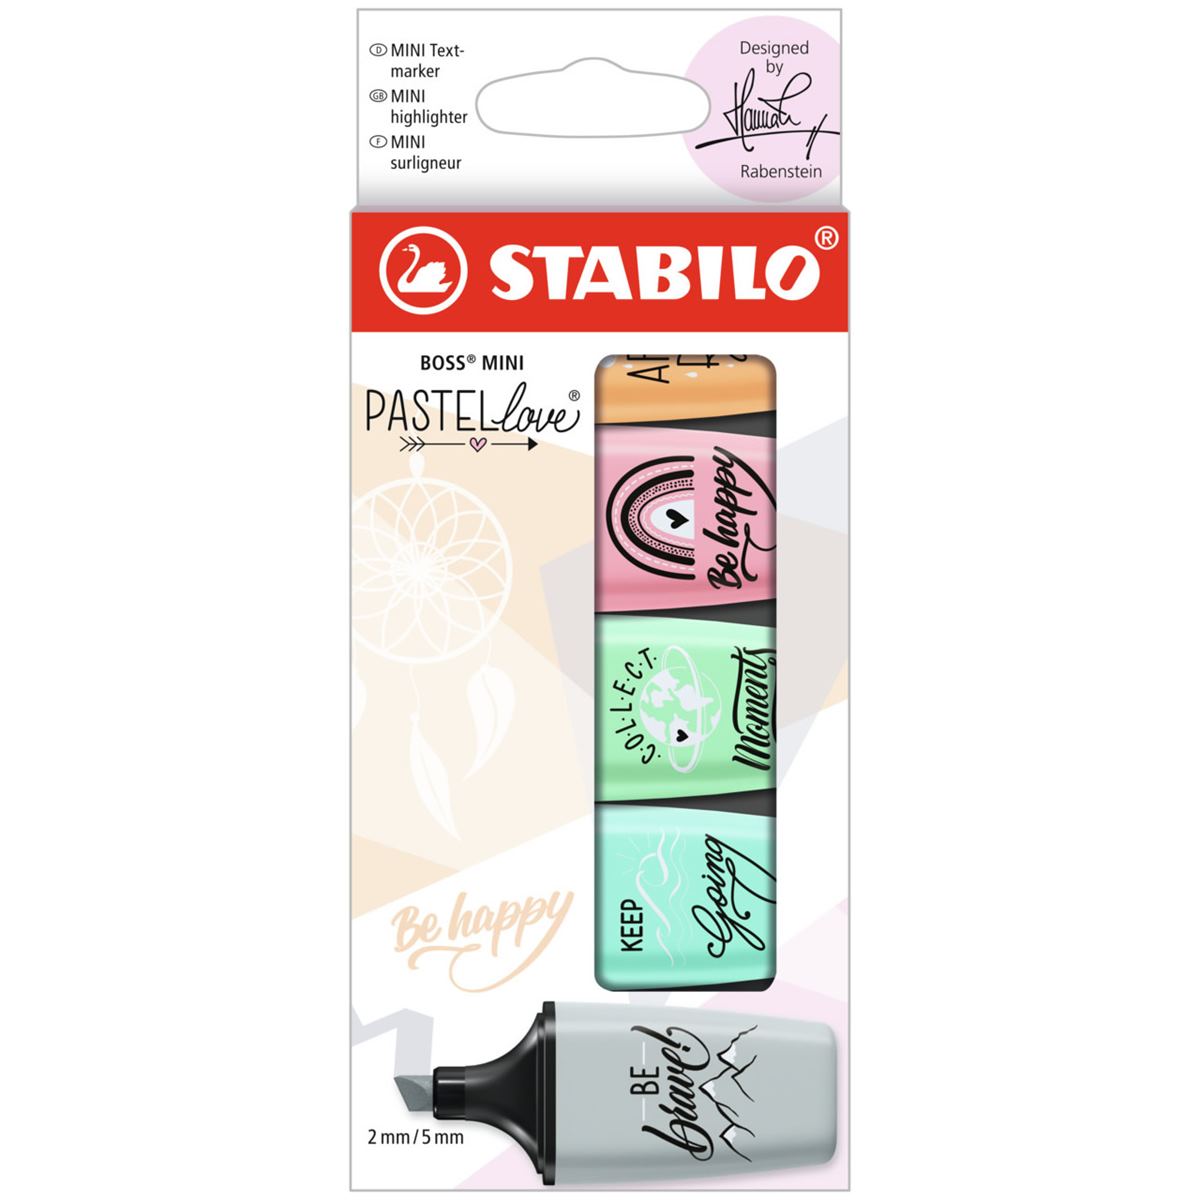 STABILO BOSS MINI Pastellove Assorted Highlighters - Pack of 5